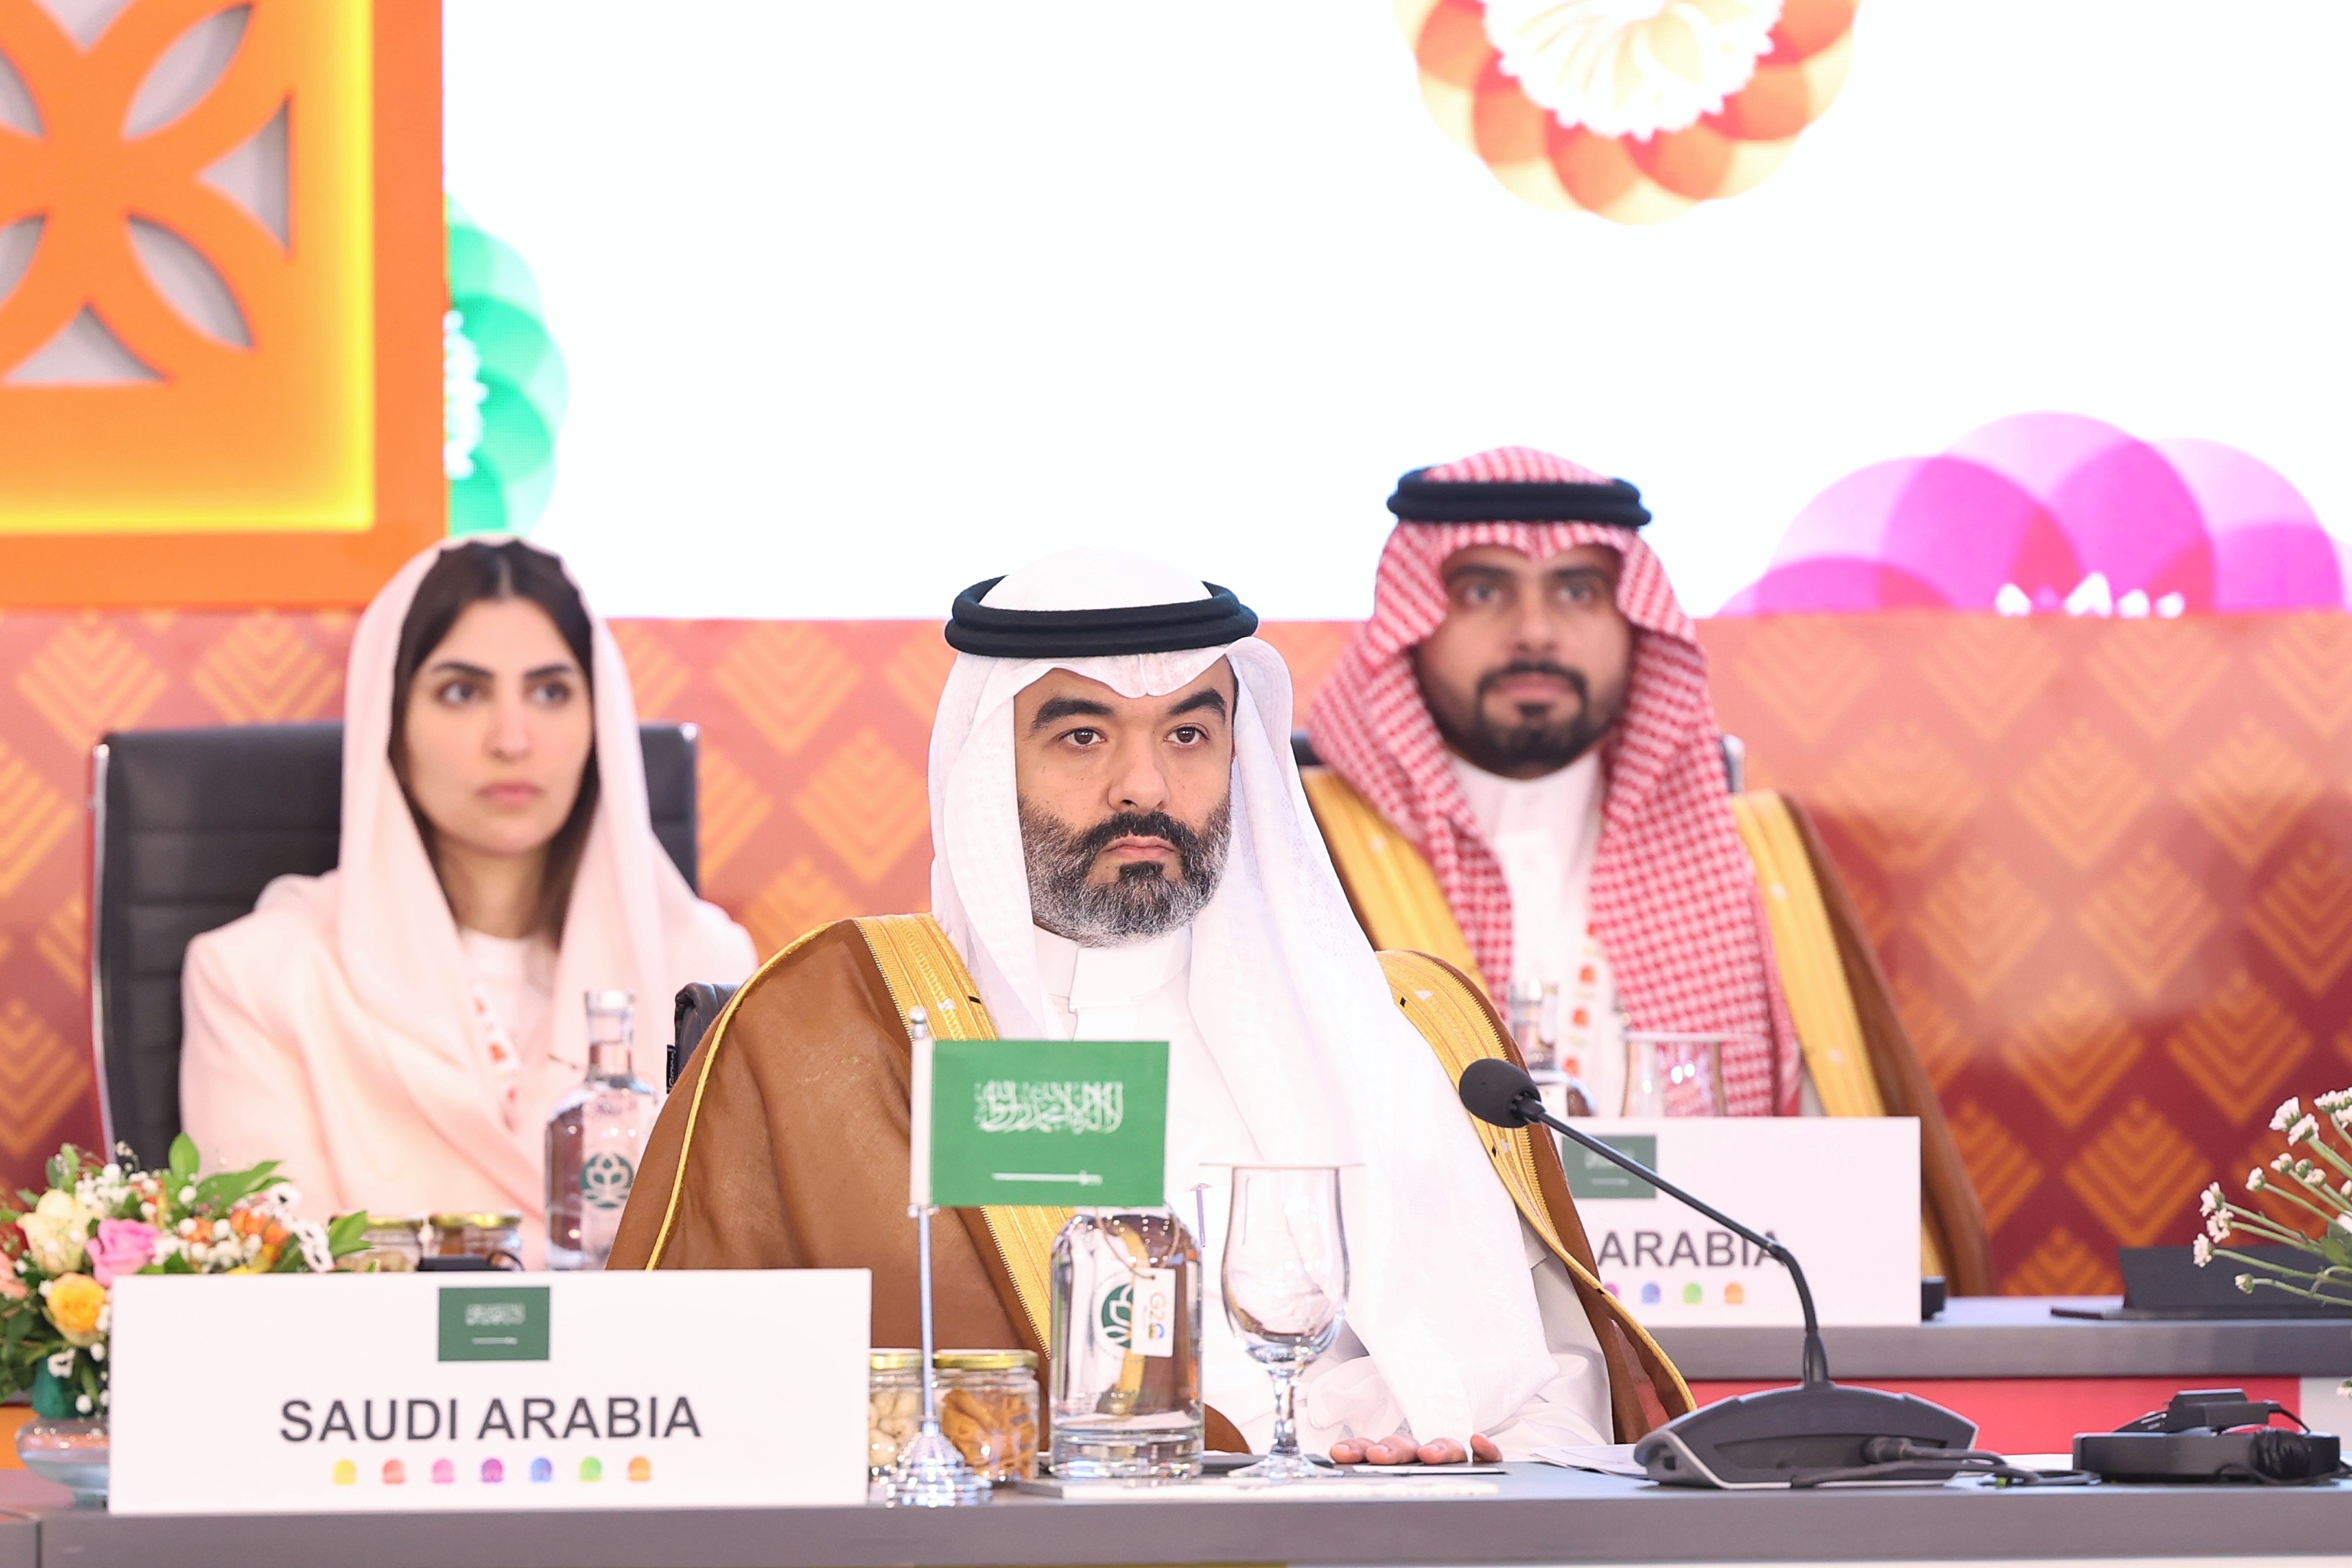 Al-Swaha Highlights Kingdom’s Vision 2030 Role in Empowering the Youth and Women